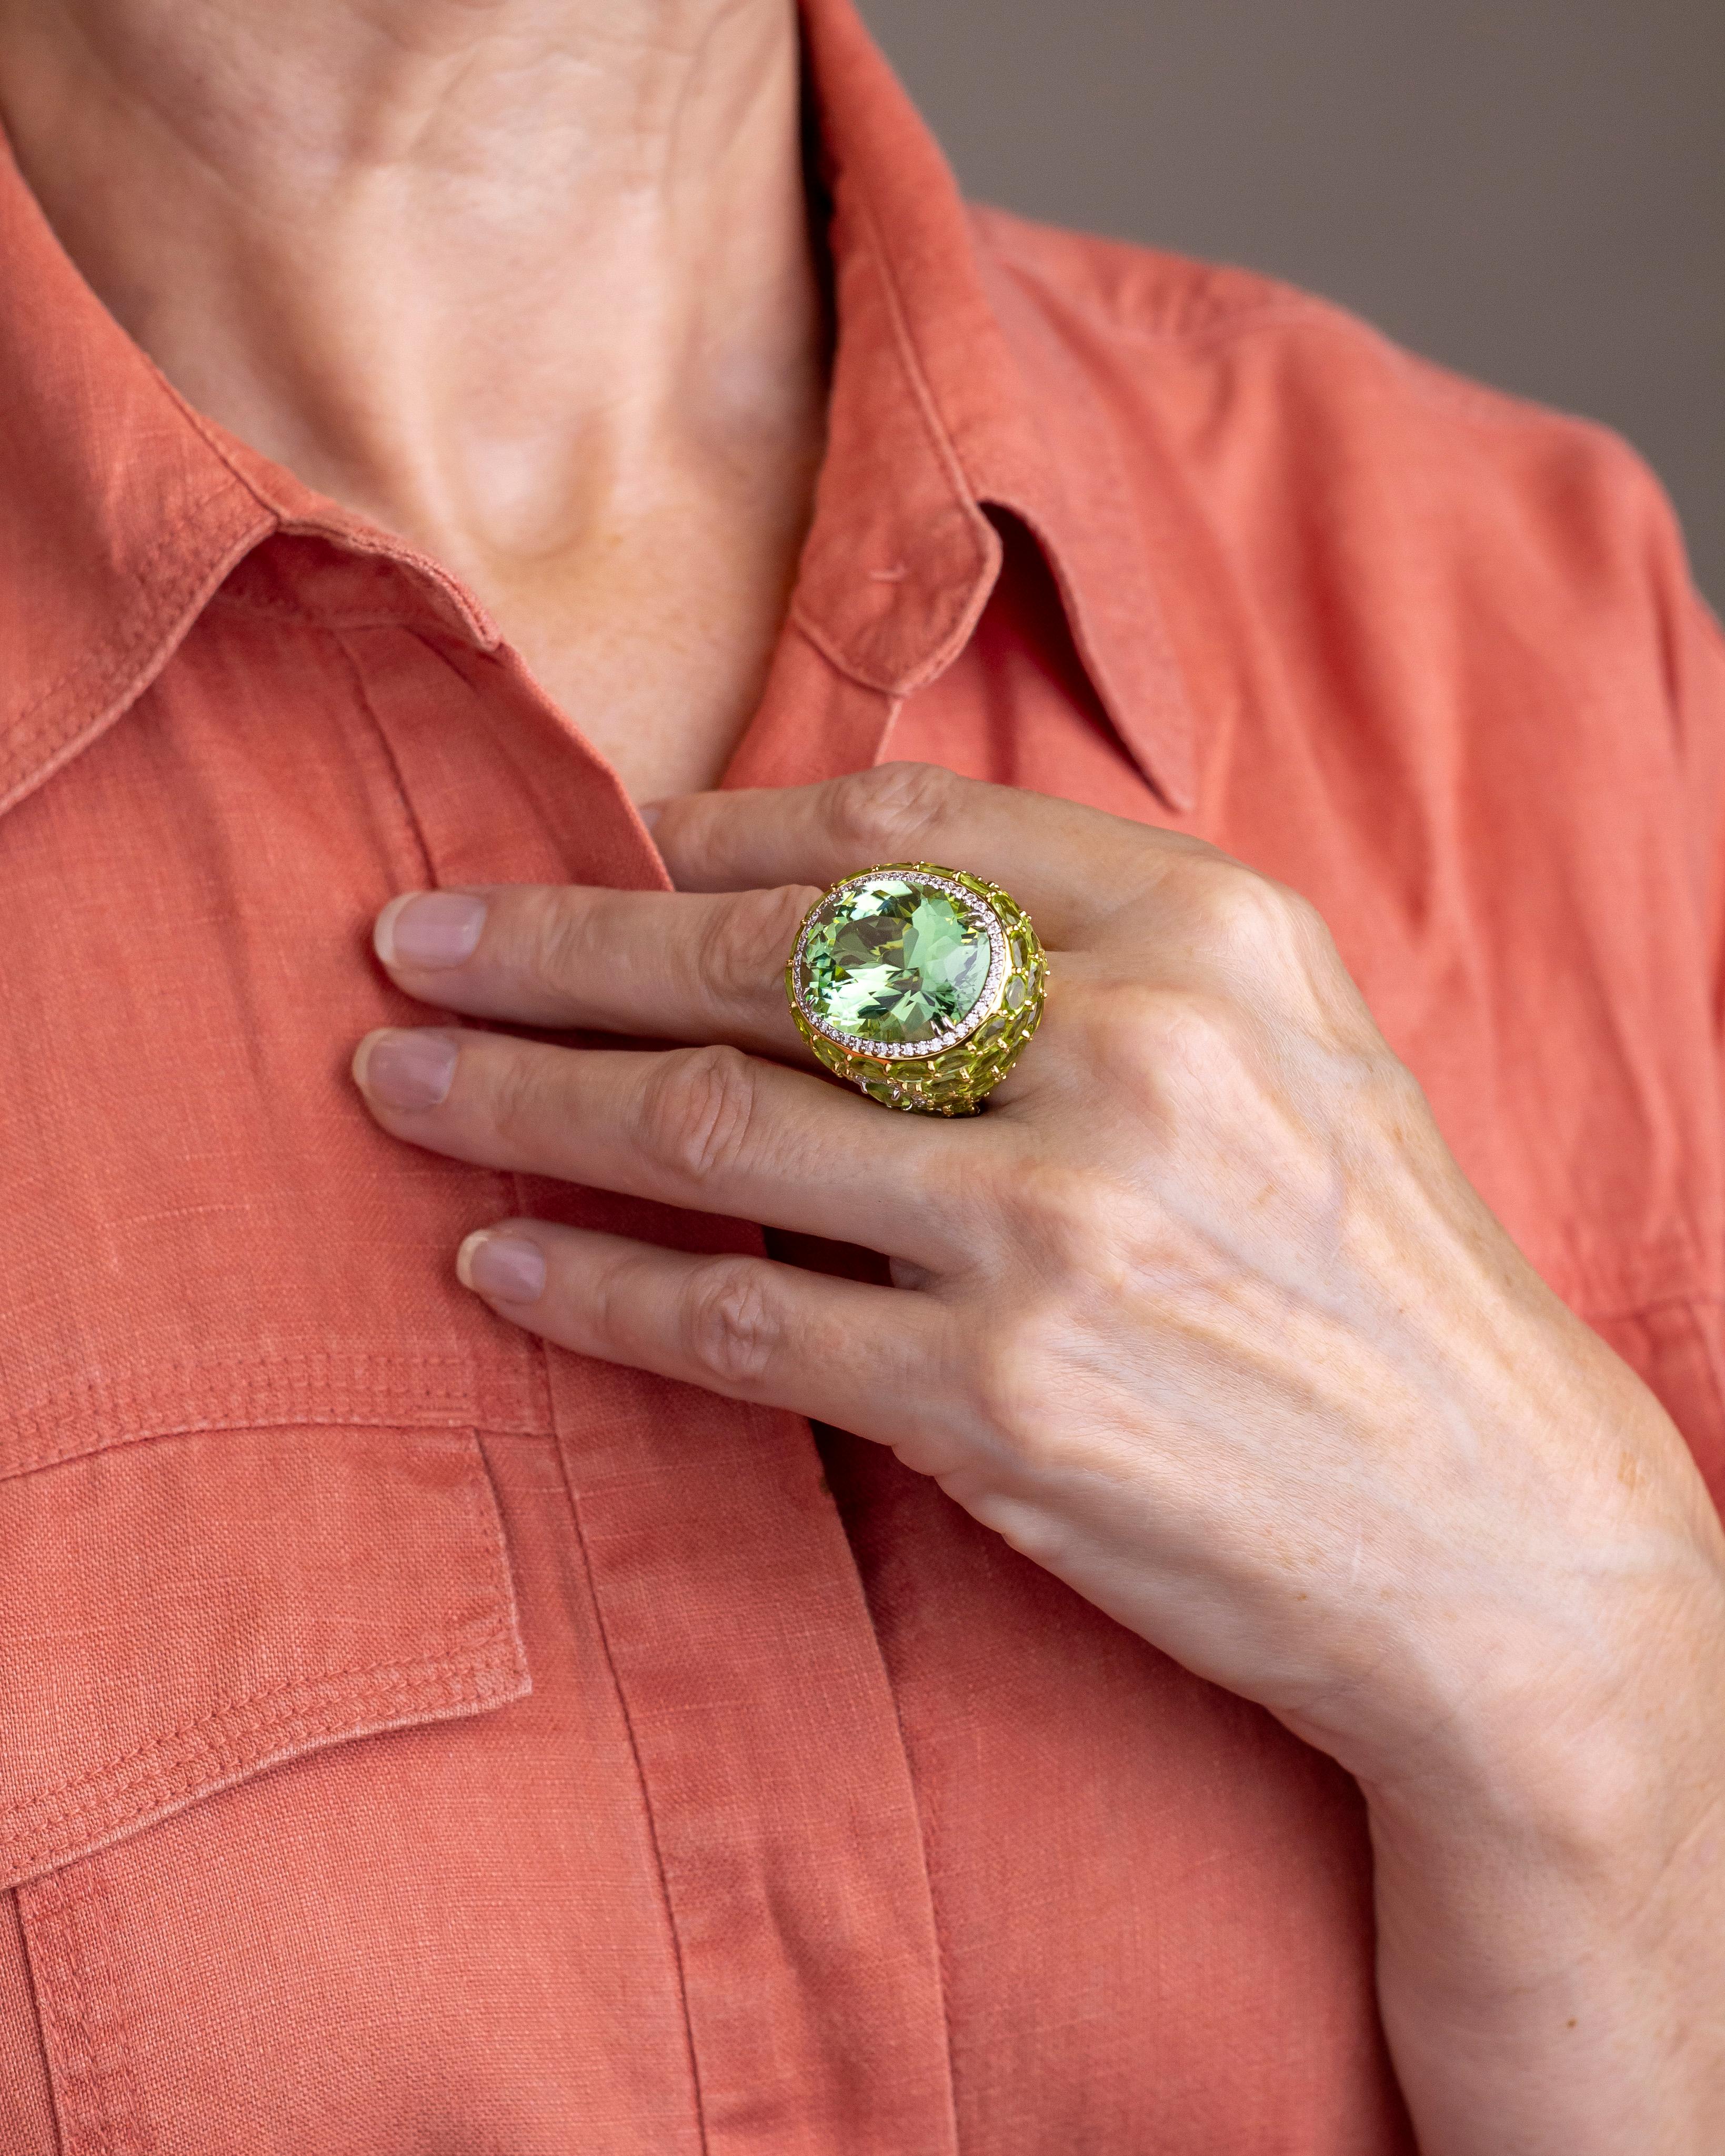 This rather spectacular cocktail ring was made by Los Angeles based jeweller 'Hubert' and is crafted from 18 karat yellow and white gold, diamonds, peridots and a large 33 carat green tourmaline. The central tourmaline has been set with four double